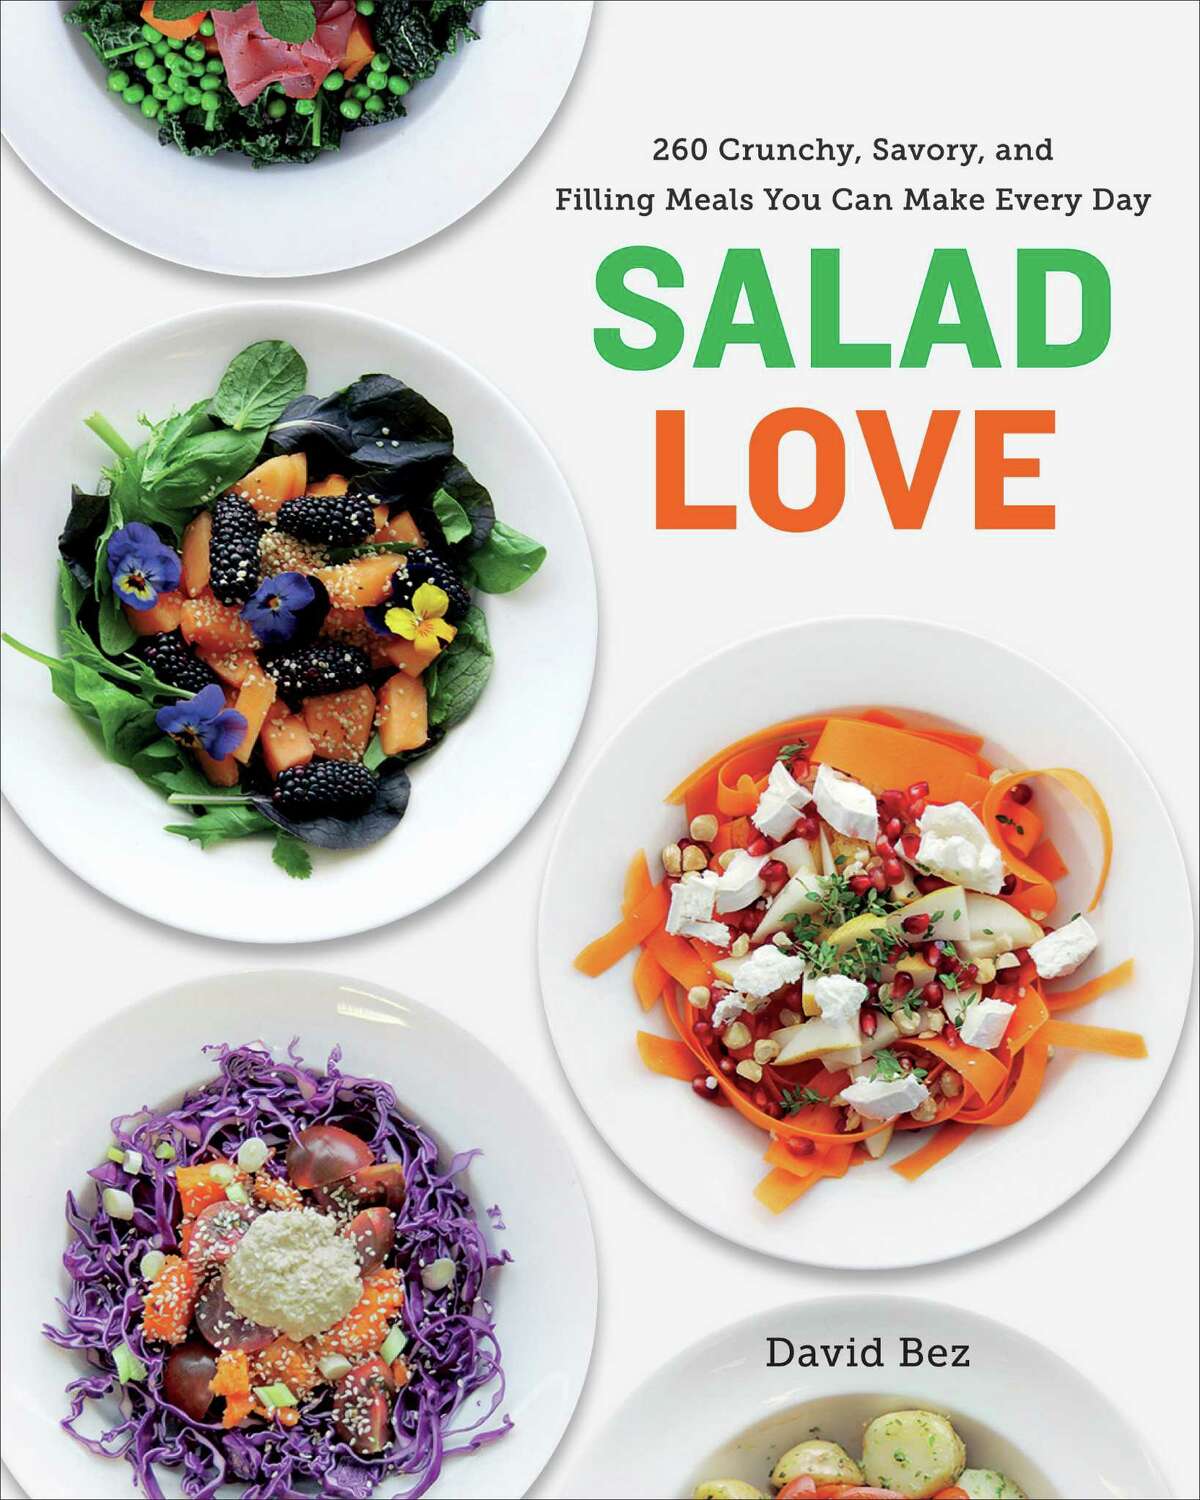 This image provided by Penguin Random House shows the cover of the book "Salad Love" by David Bez. (AP Photo/Penguin Random House) ORG XMIT: NY110